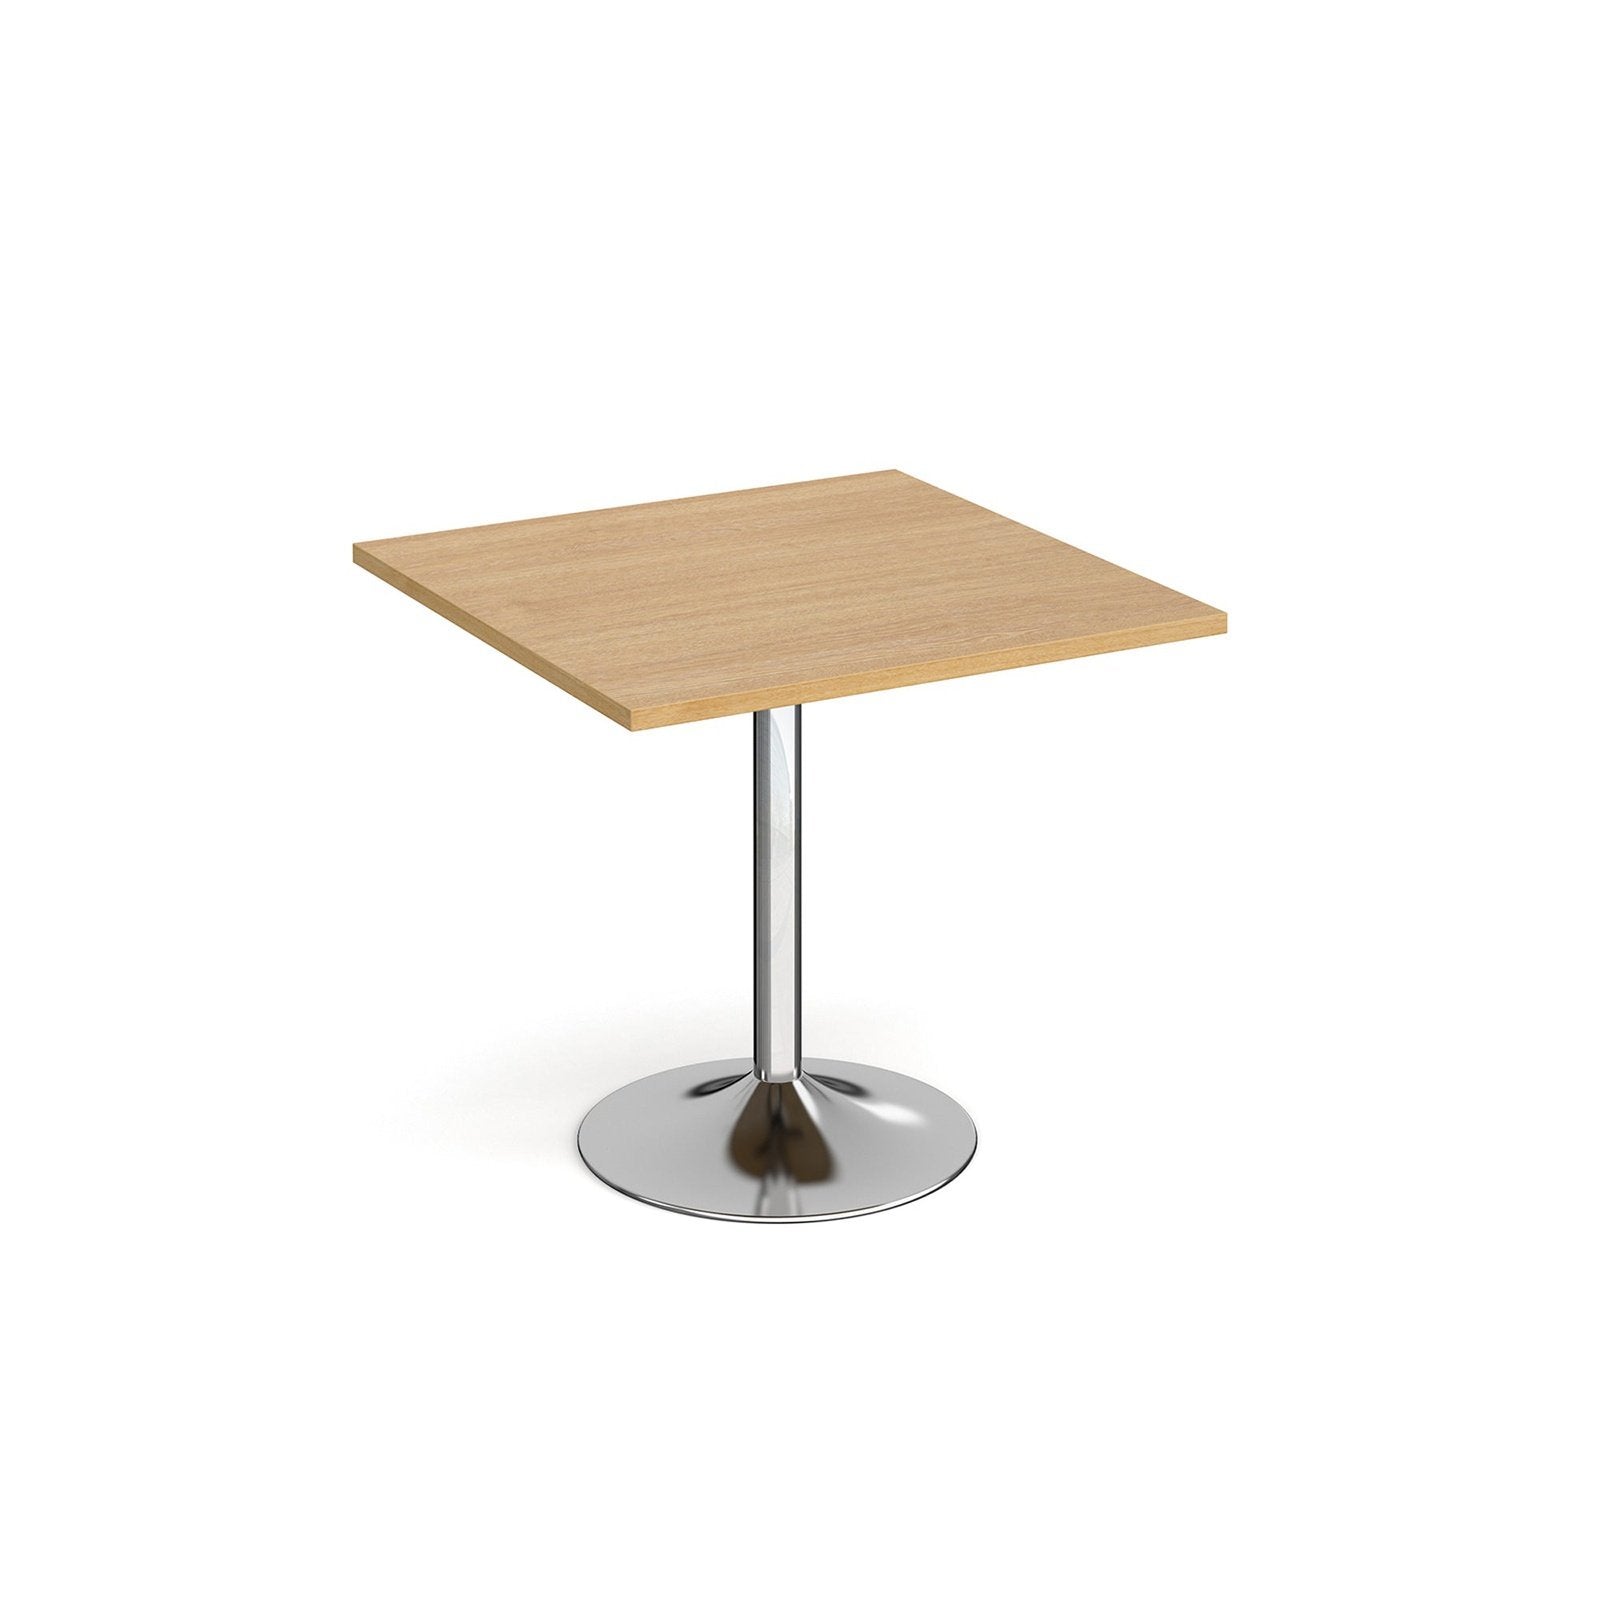 Genoa square dining table with trumpet base - Office Products Online